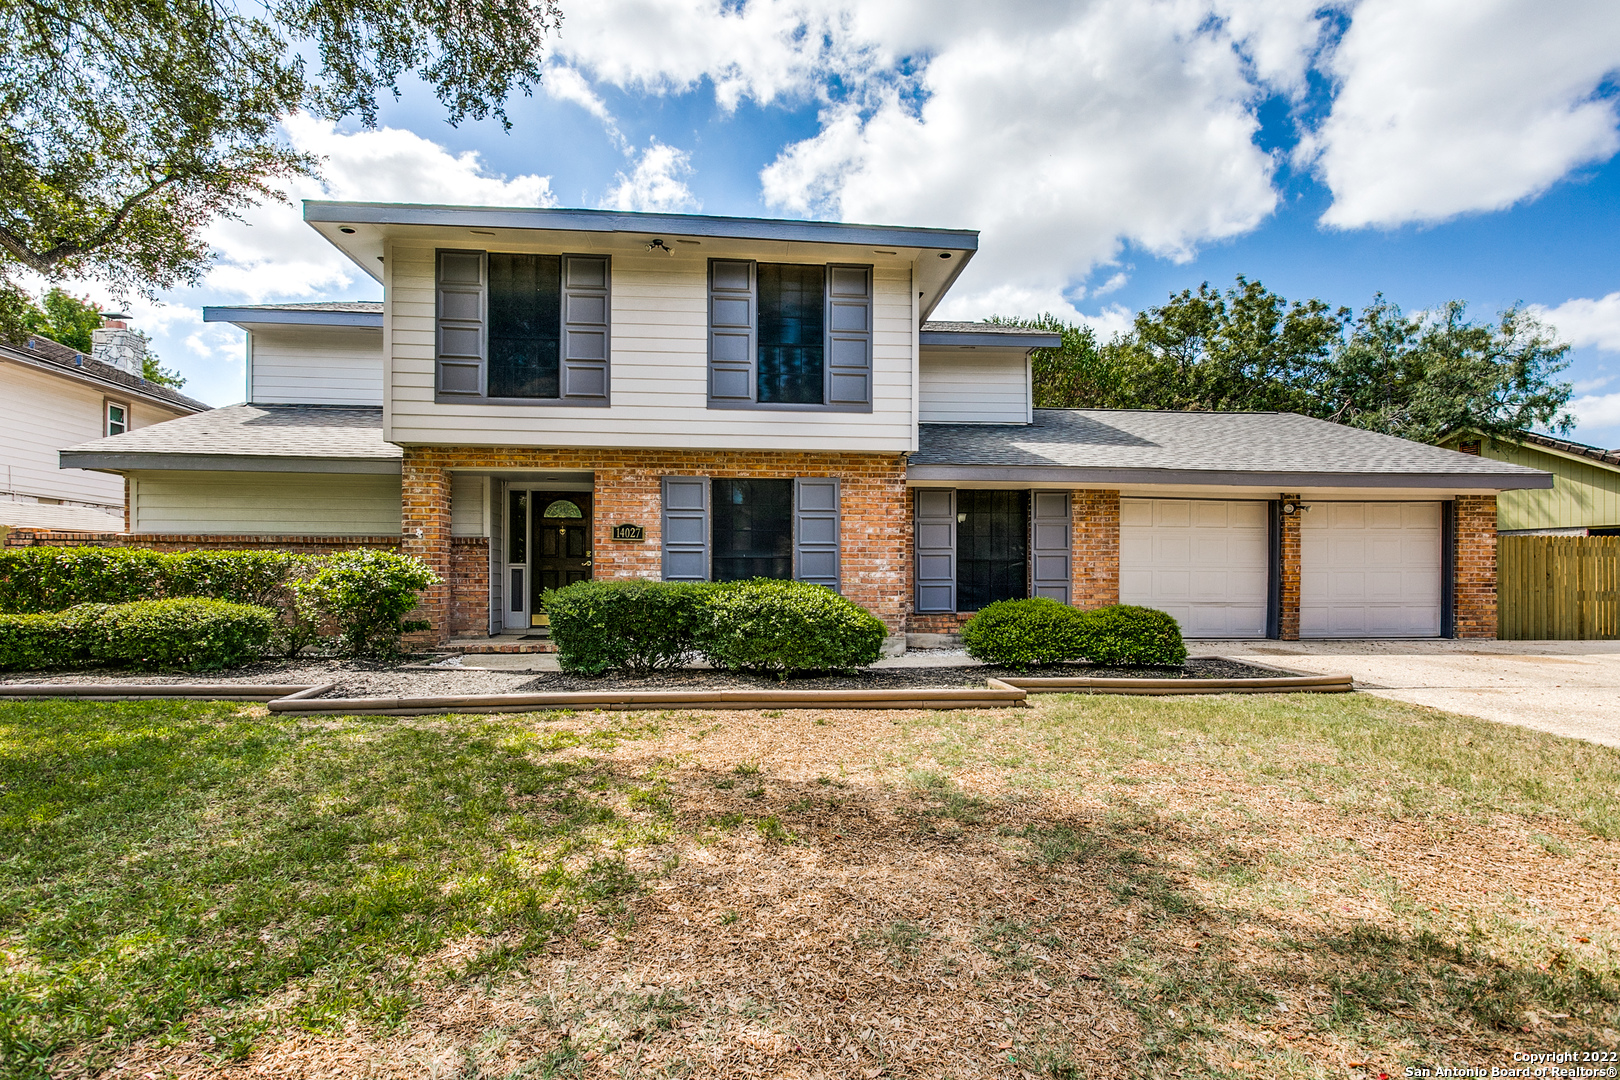 OPEN HOUSE THIS WEEKEND.  SATURDAY, OCTOBER 15TH FROM 2:00 - 4:00 AND SUNDAY, OCTOBER 16TH FROM 2:00 - 4:00.  Beautifully updated 4 bedroom, 3.5 bath home, located in North Central San Antonio, in charming Oak Meadow.  This home is 2801 square foot, sitterle built in 1980.  Recent updates include: new roof (11/21), new front door, exterior and interior paint, fencing replaced 2022, new carpet, light fixtures and hardware, stainless steel appliances. This traditional style house offers dual masters, a game room, and plenty of space to make your own. Gorgeous backyard, complete with covered patio, a newly resurfaced pool, and hot tub is the perfect setting to relax with family and friends. Don't miss out on this opportunity!  HOA is voluntary.  Great central location with NEISD schools.